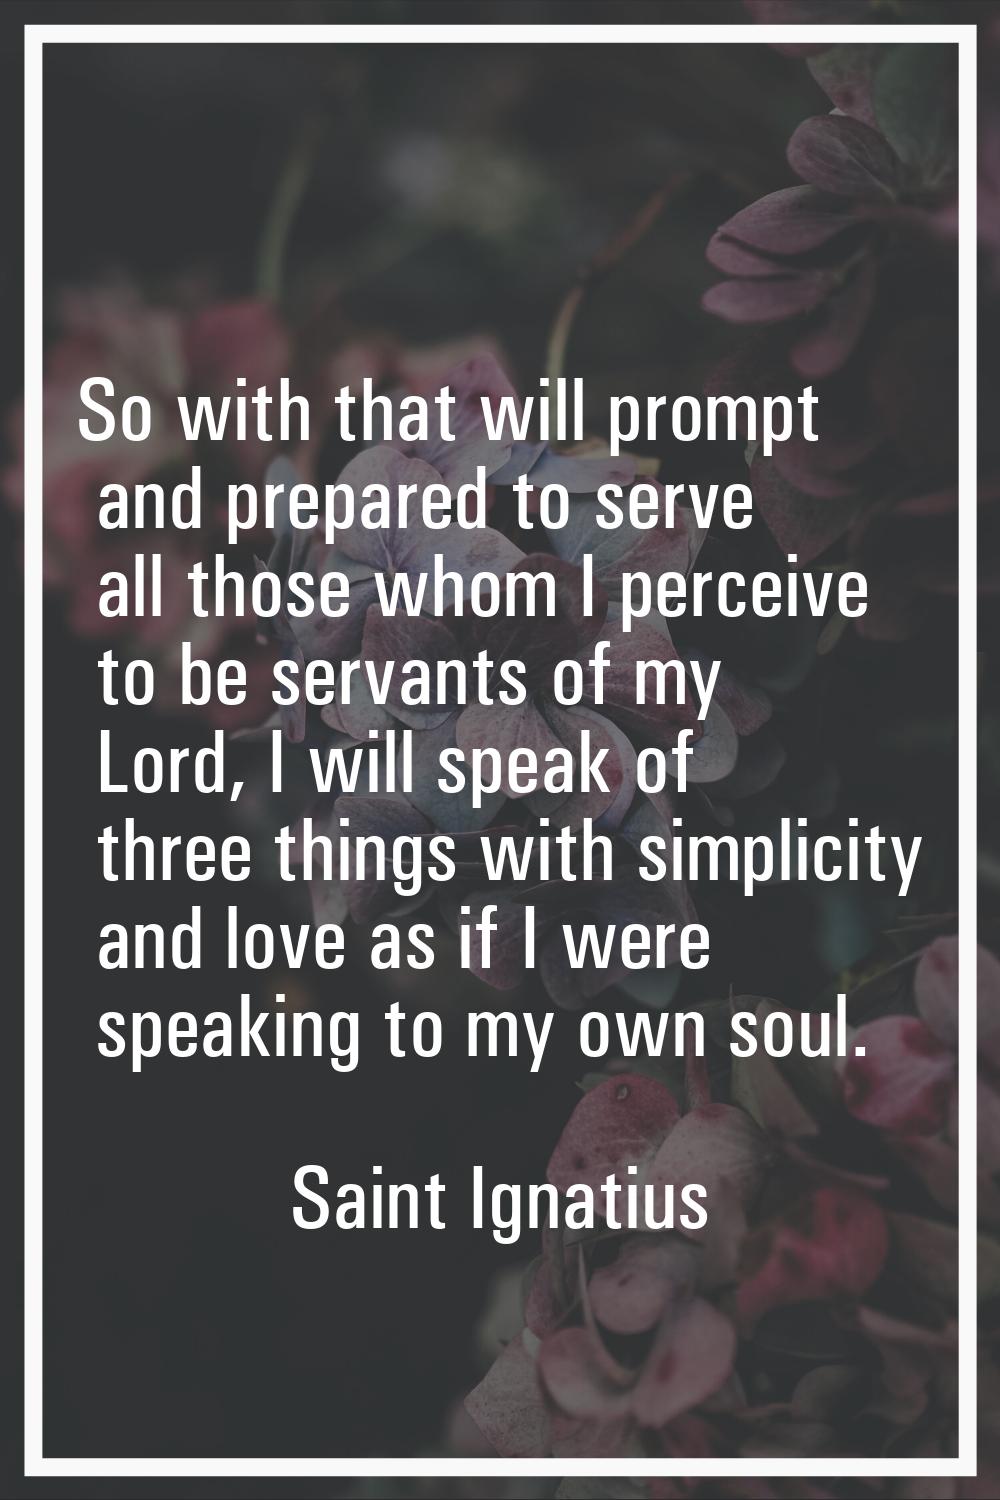 So with that will prompt and prepared to serve all those whom I perceive to be servants of my Lord,